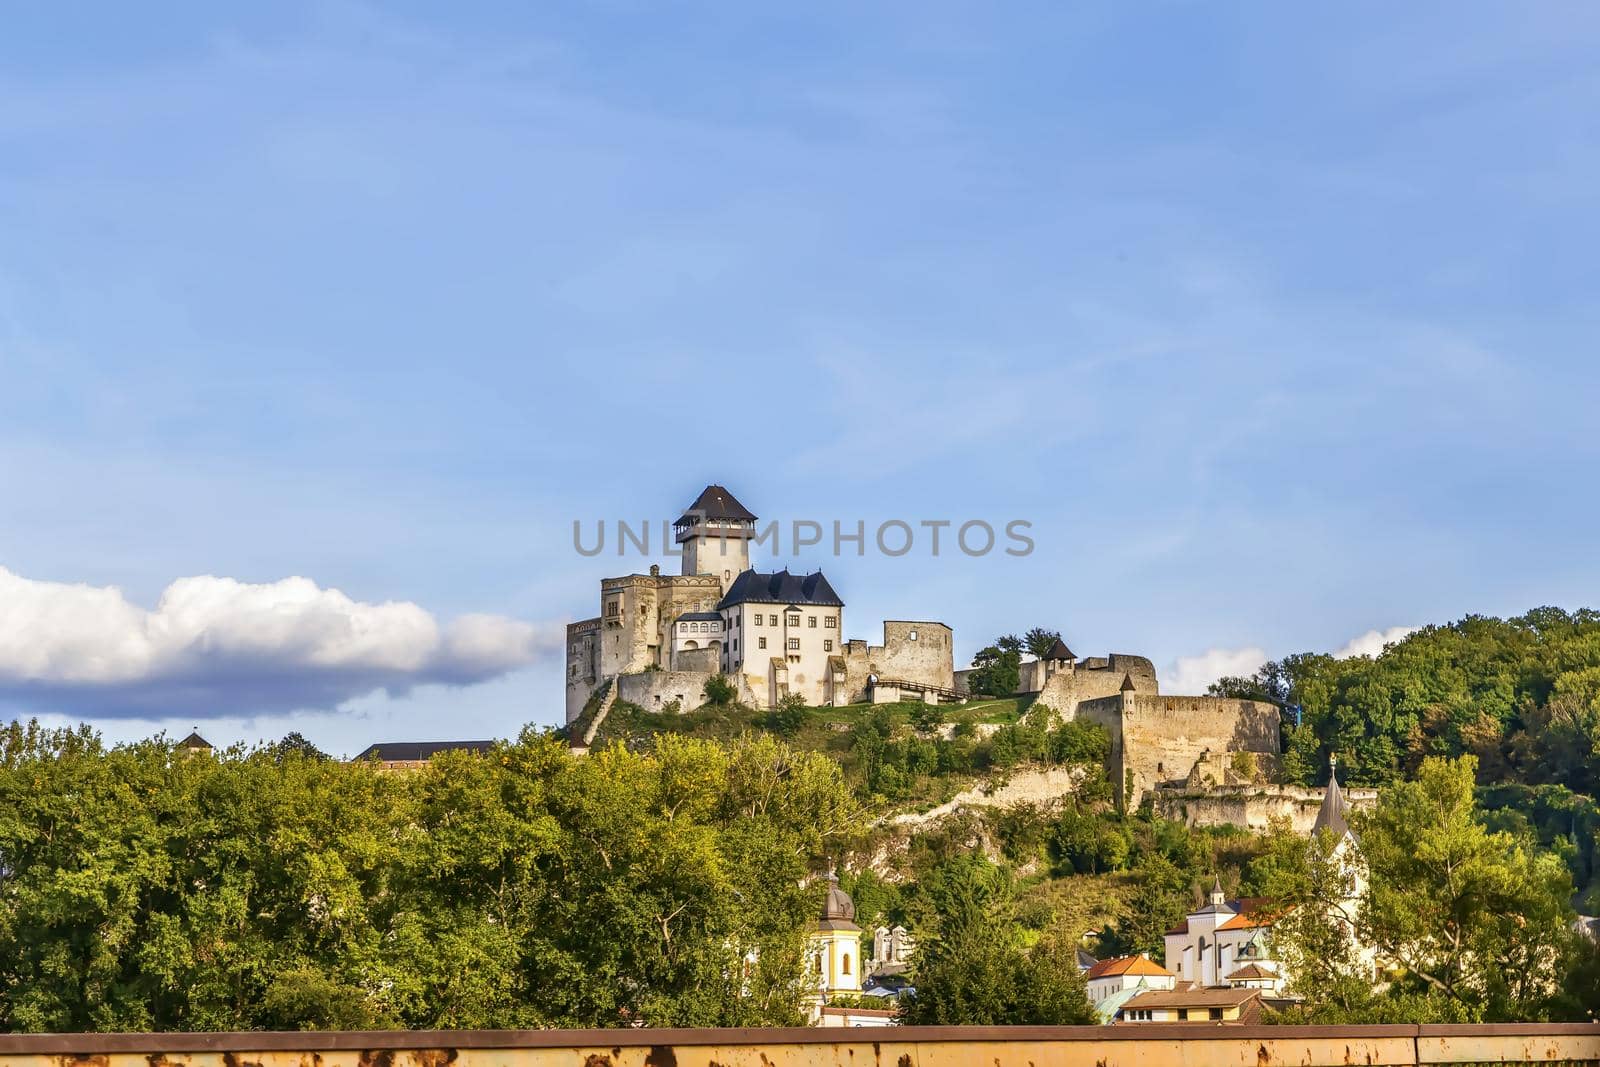 Trencin Castle is a castle above the town of Trencin in western Slovakia.